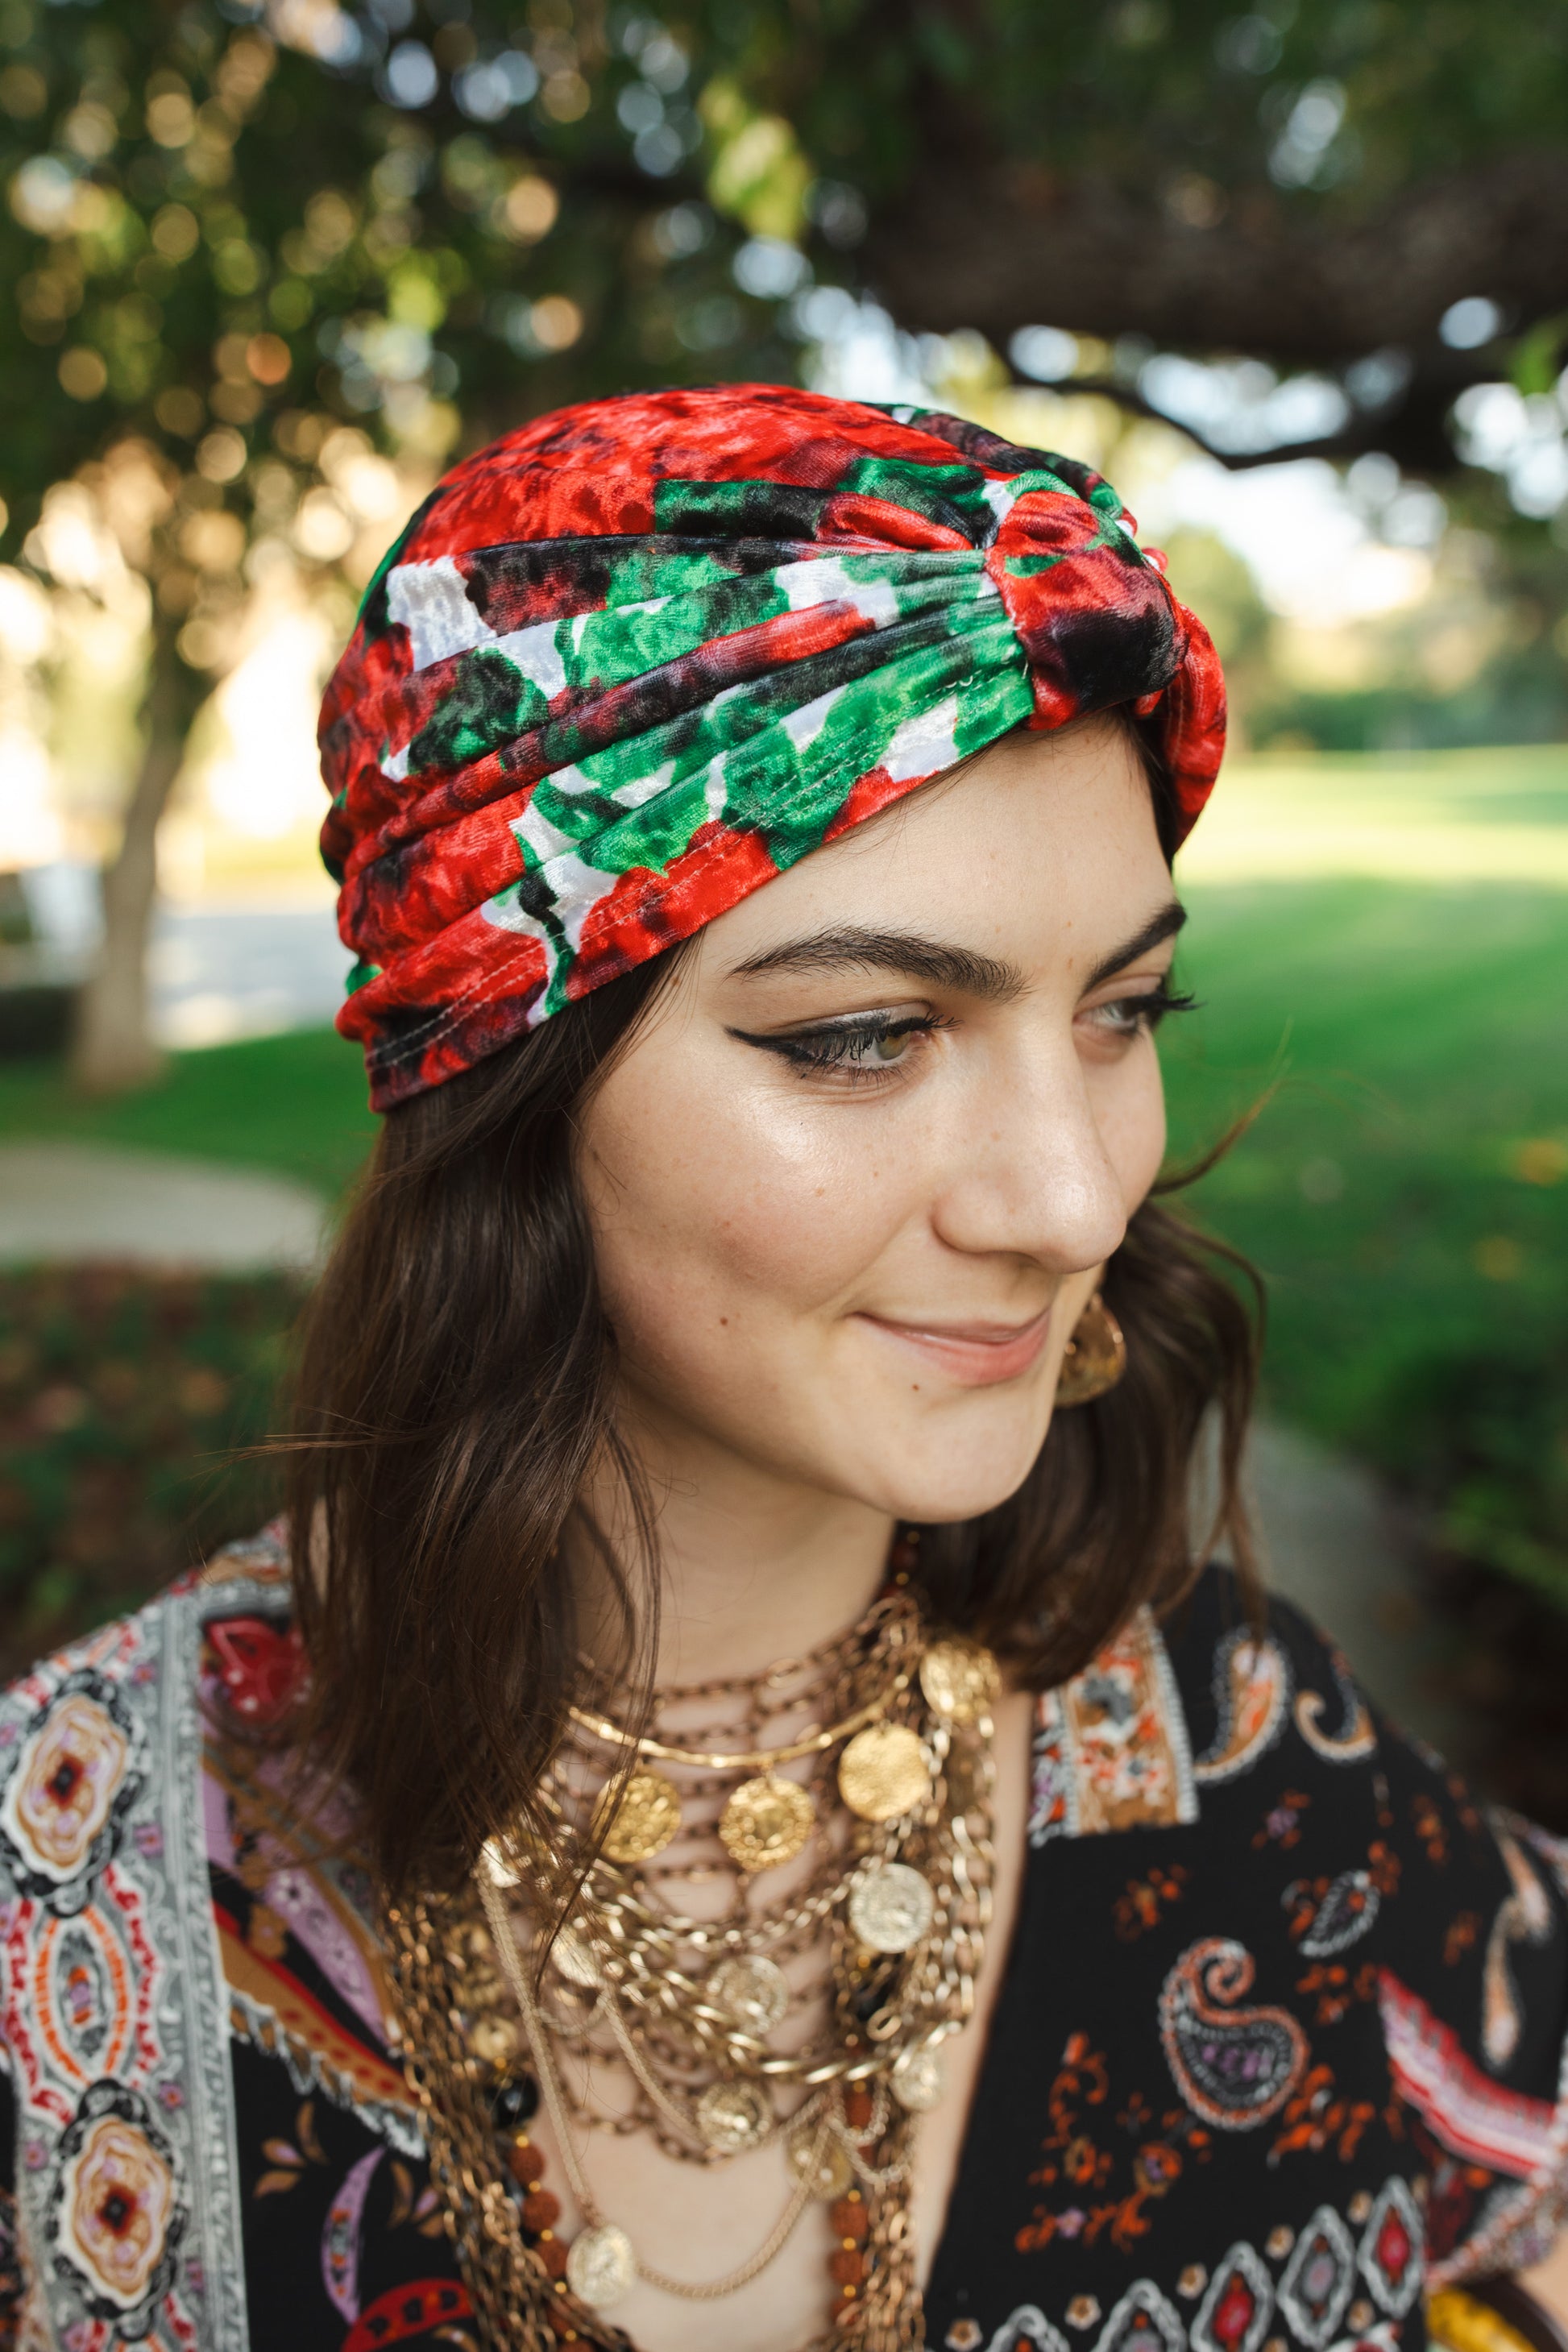 Red, green, white and black impressionist floral stretch velvet fashion turban hat that wears similar to a beanie, with ruching of the fabric that meets front and center at an elegant knot. Vintage-inspired retro 1920s mixed with a modern fabric.